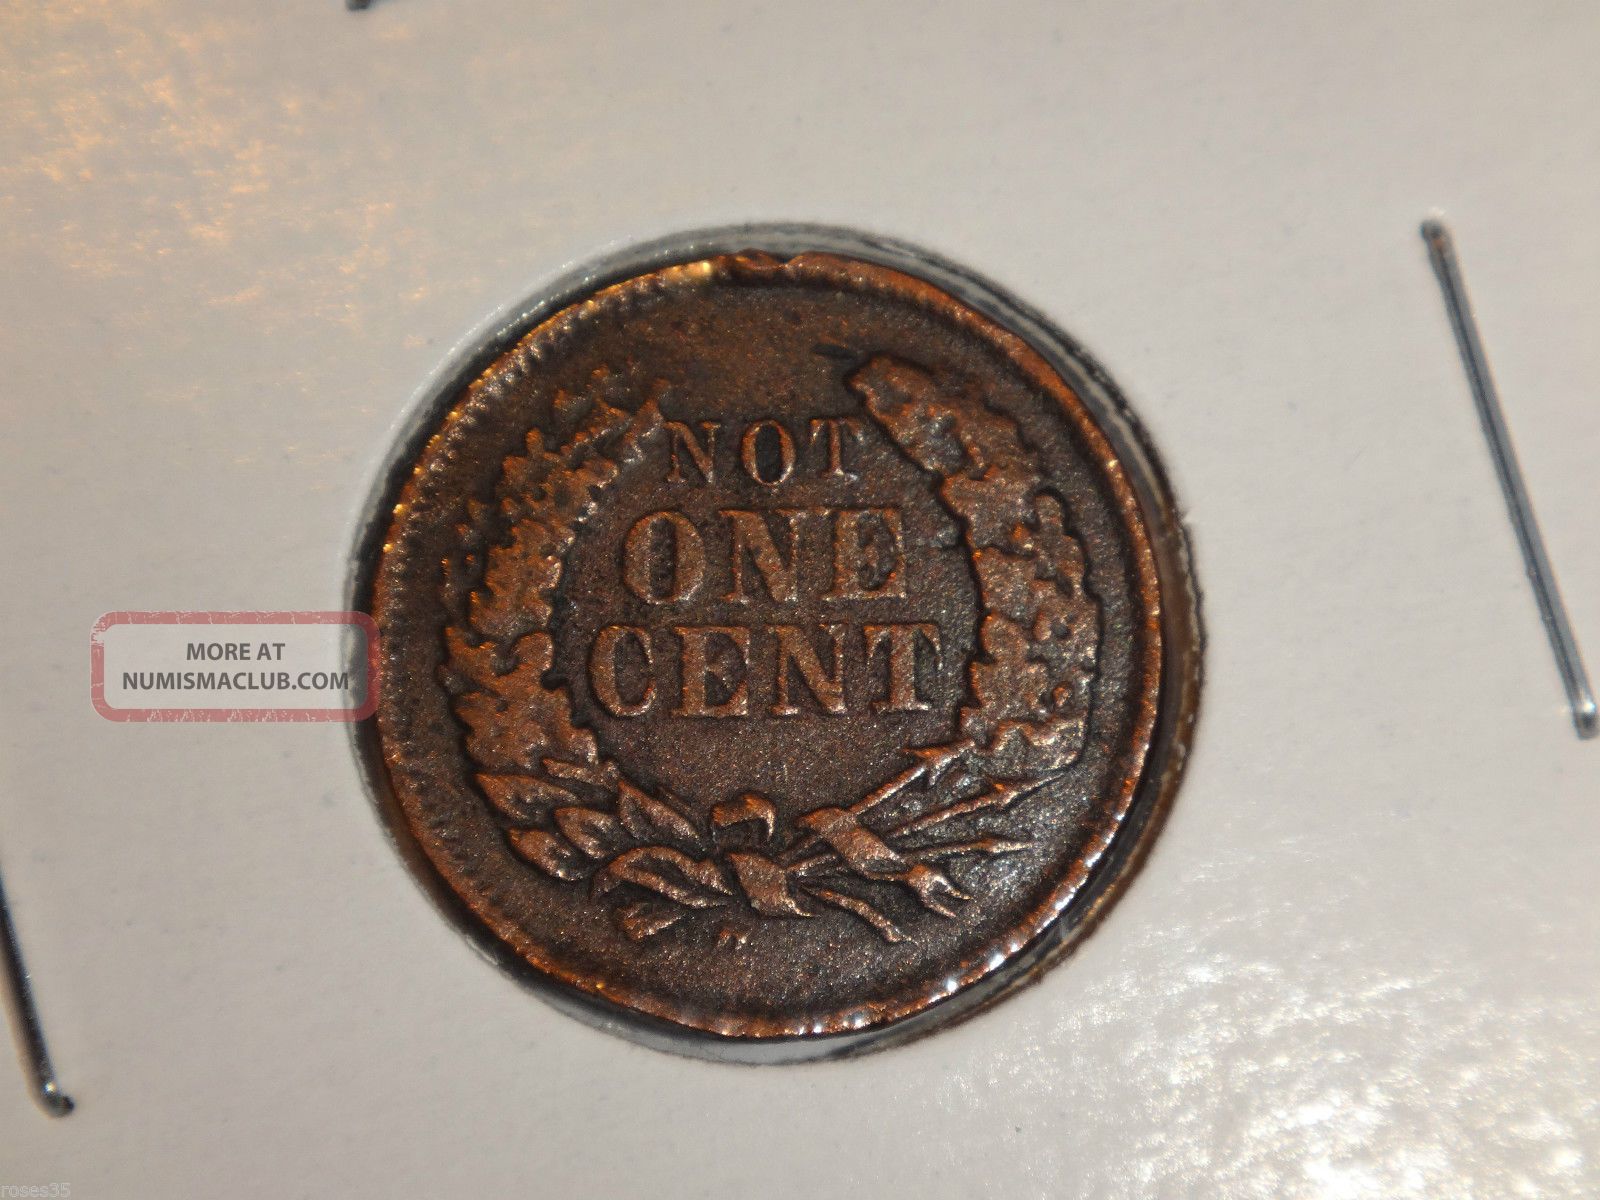 1863 Indian Head Penny " Not One Cent " Civil War Token 1c Highly